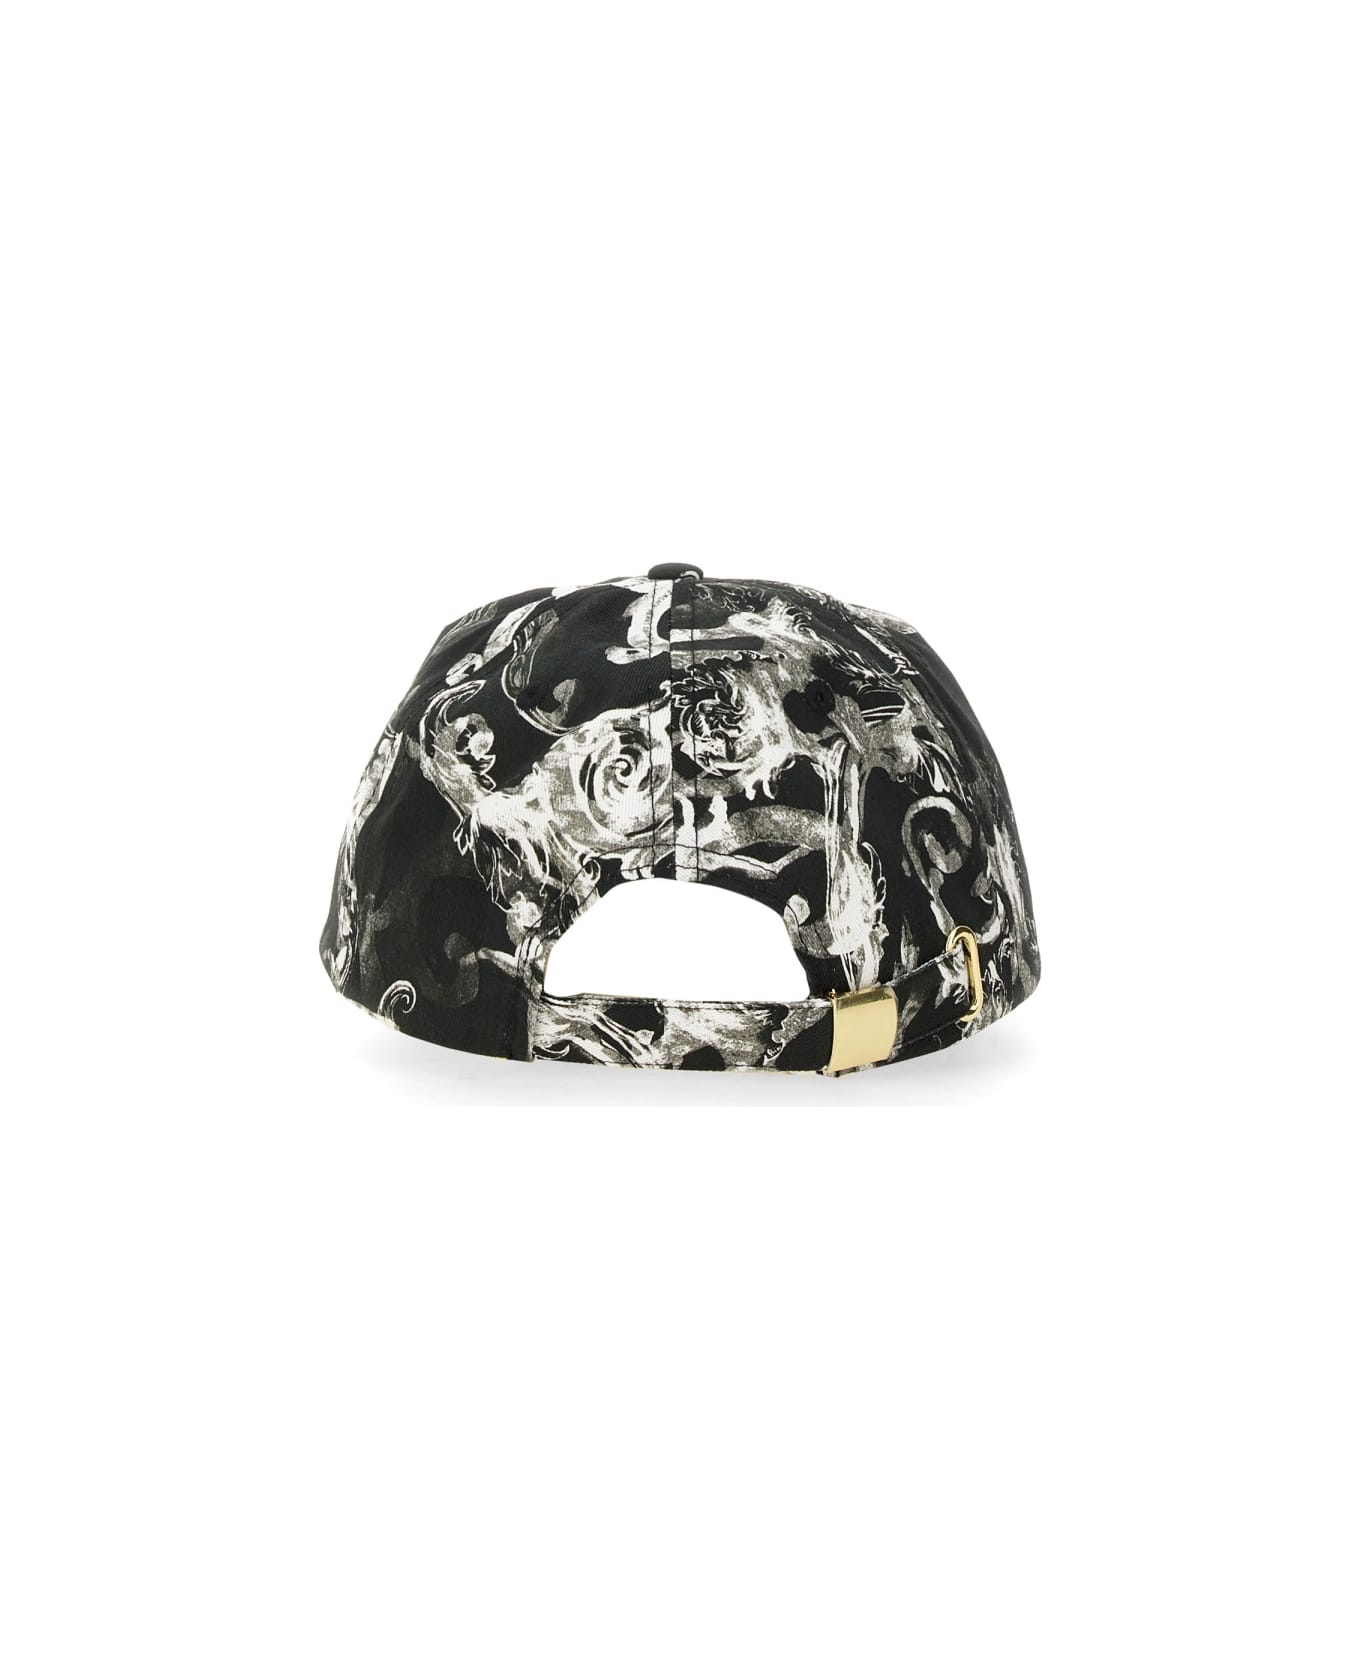 Versace Jeans Couture Baseball Hat With Logo - BLACK